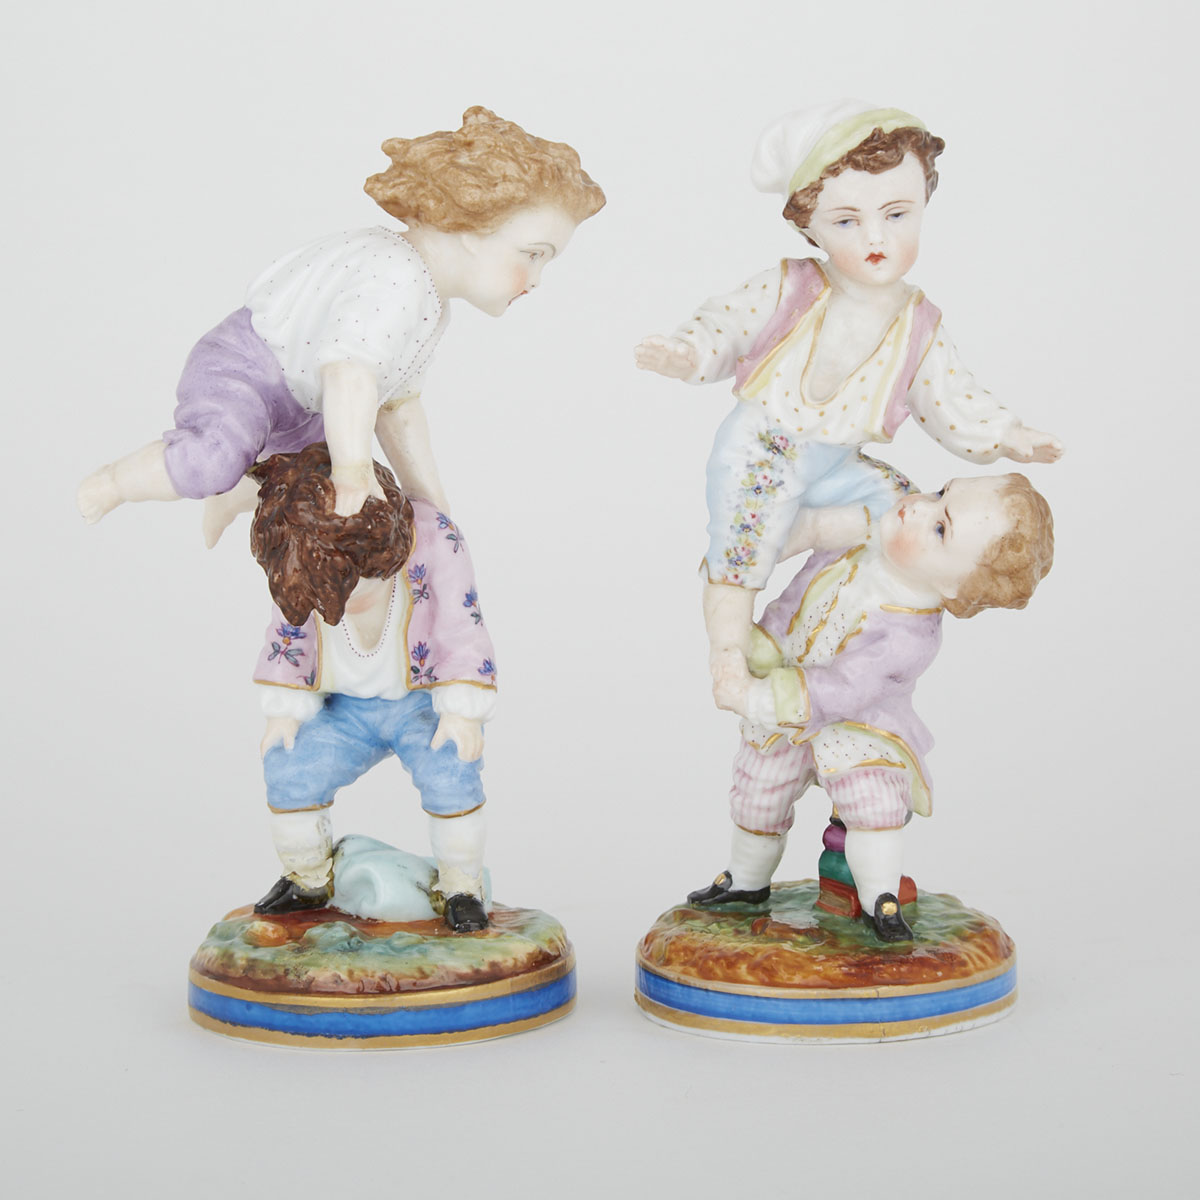 Pair of German Porcelain Figure Groups of Playing Children, c.1900